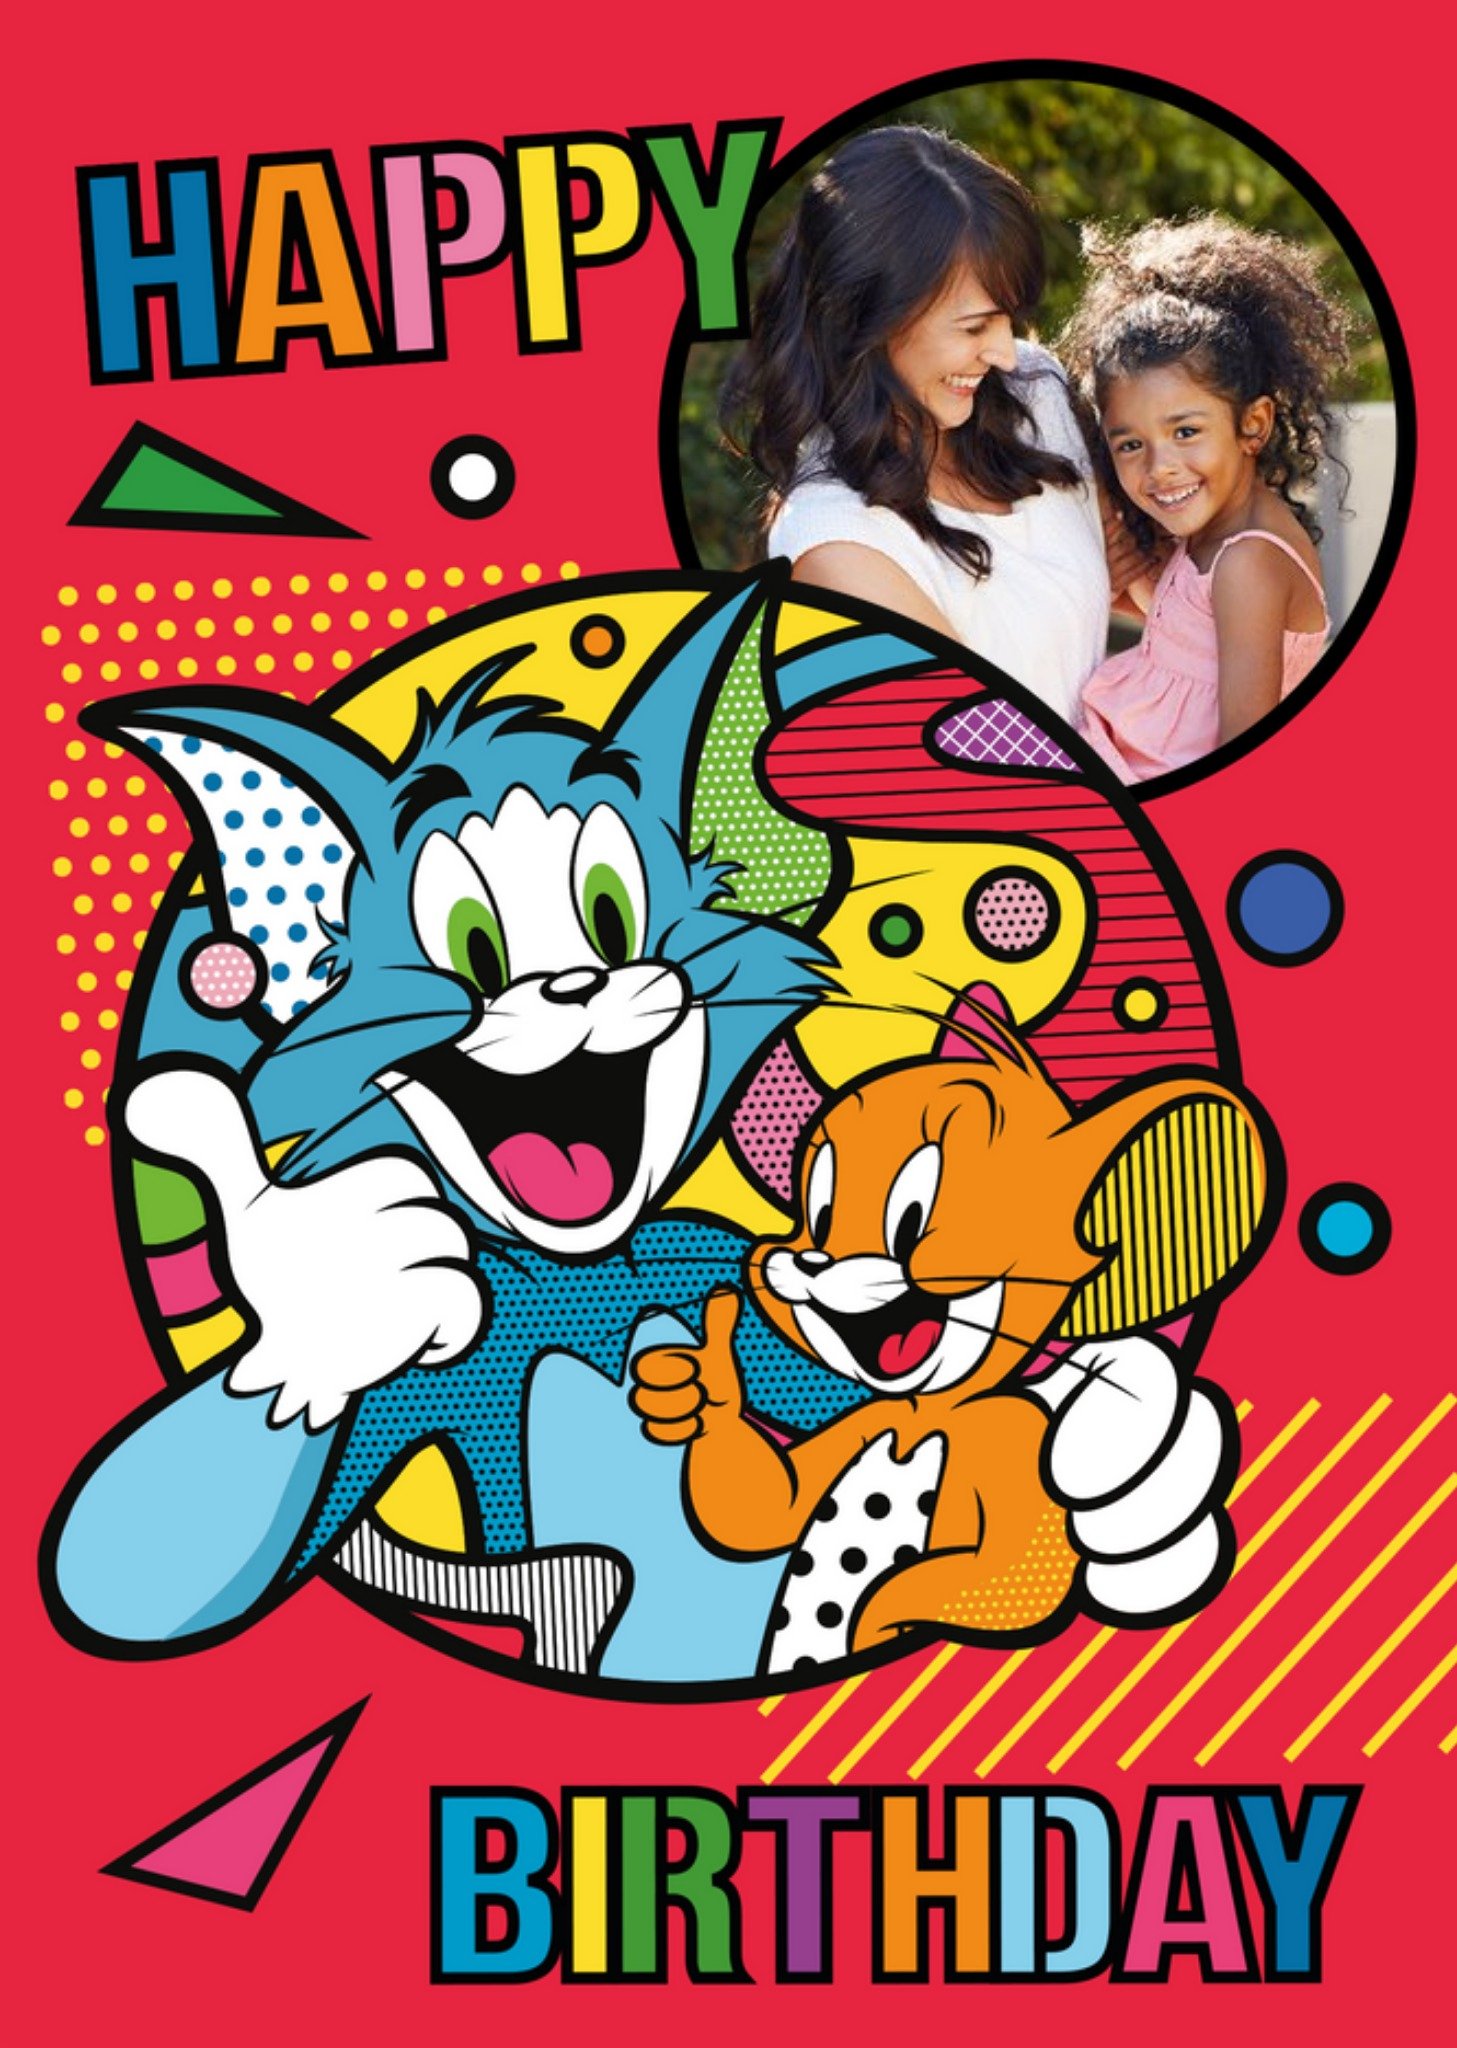 Moonpig Tom And Jerry Pop Art Style Photo Upload Birthday Card, Large